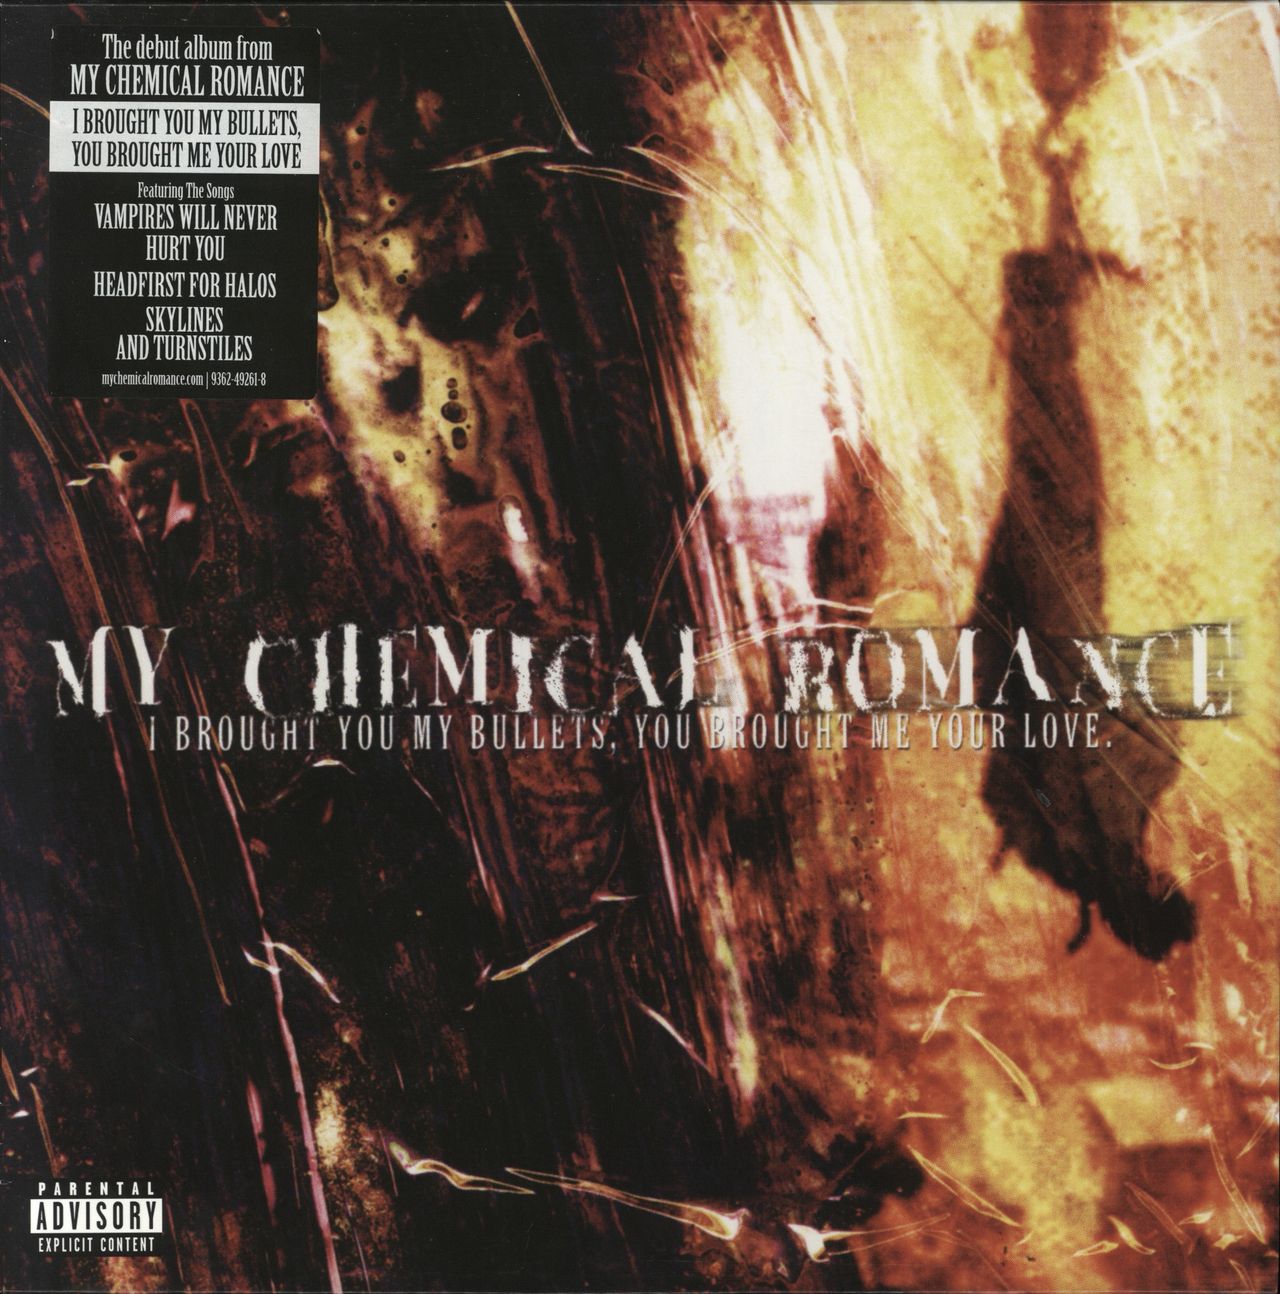 My Chemical Romance I Brought You My Bullets, You Brought Me Your Love UK vinyl LP album (LP record) 9362-49261-8